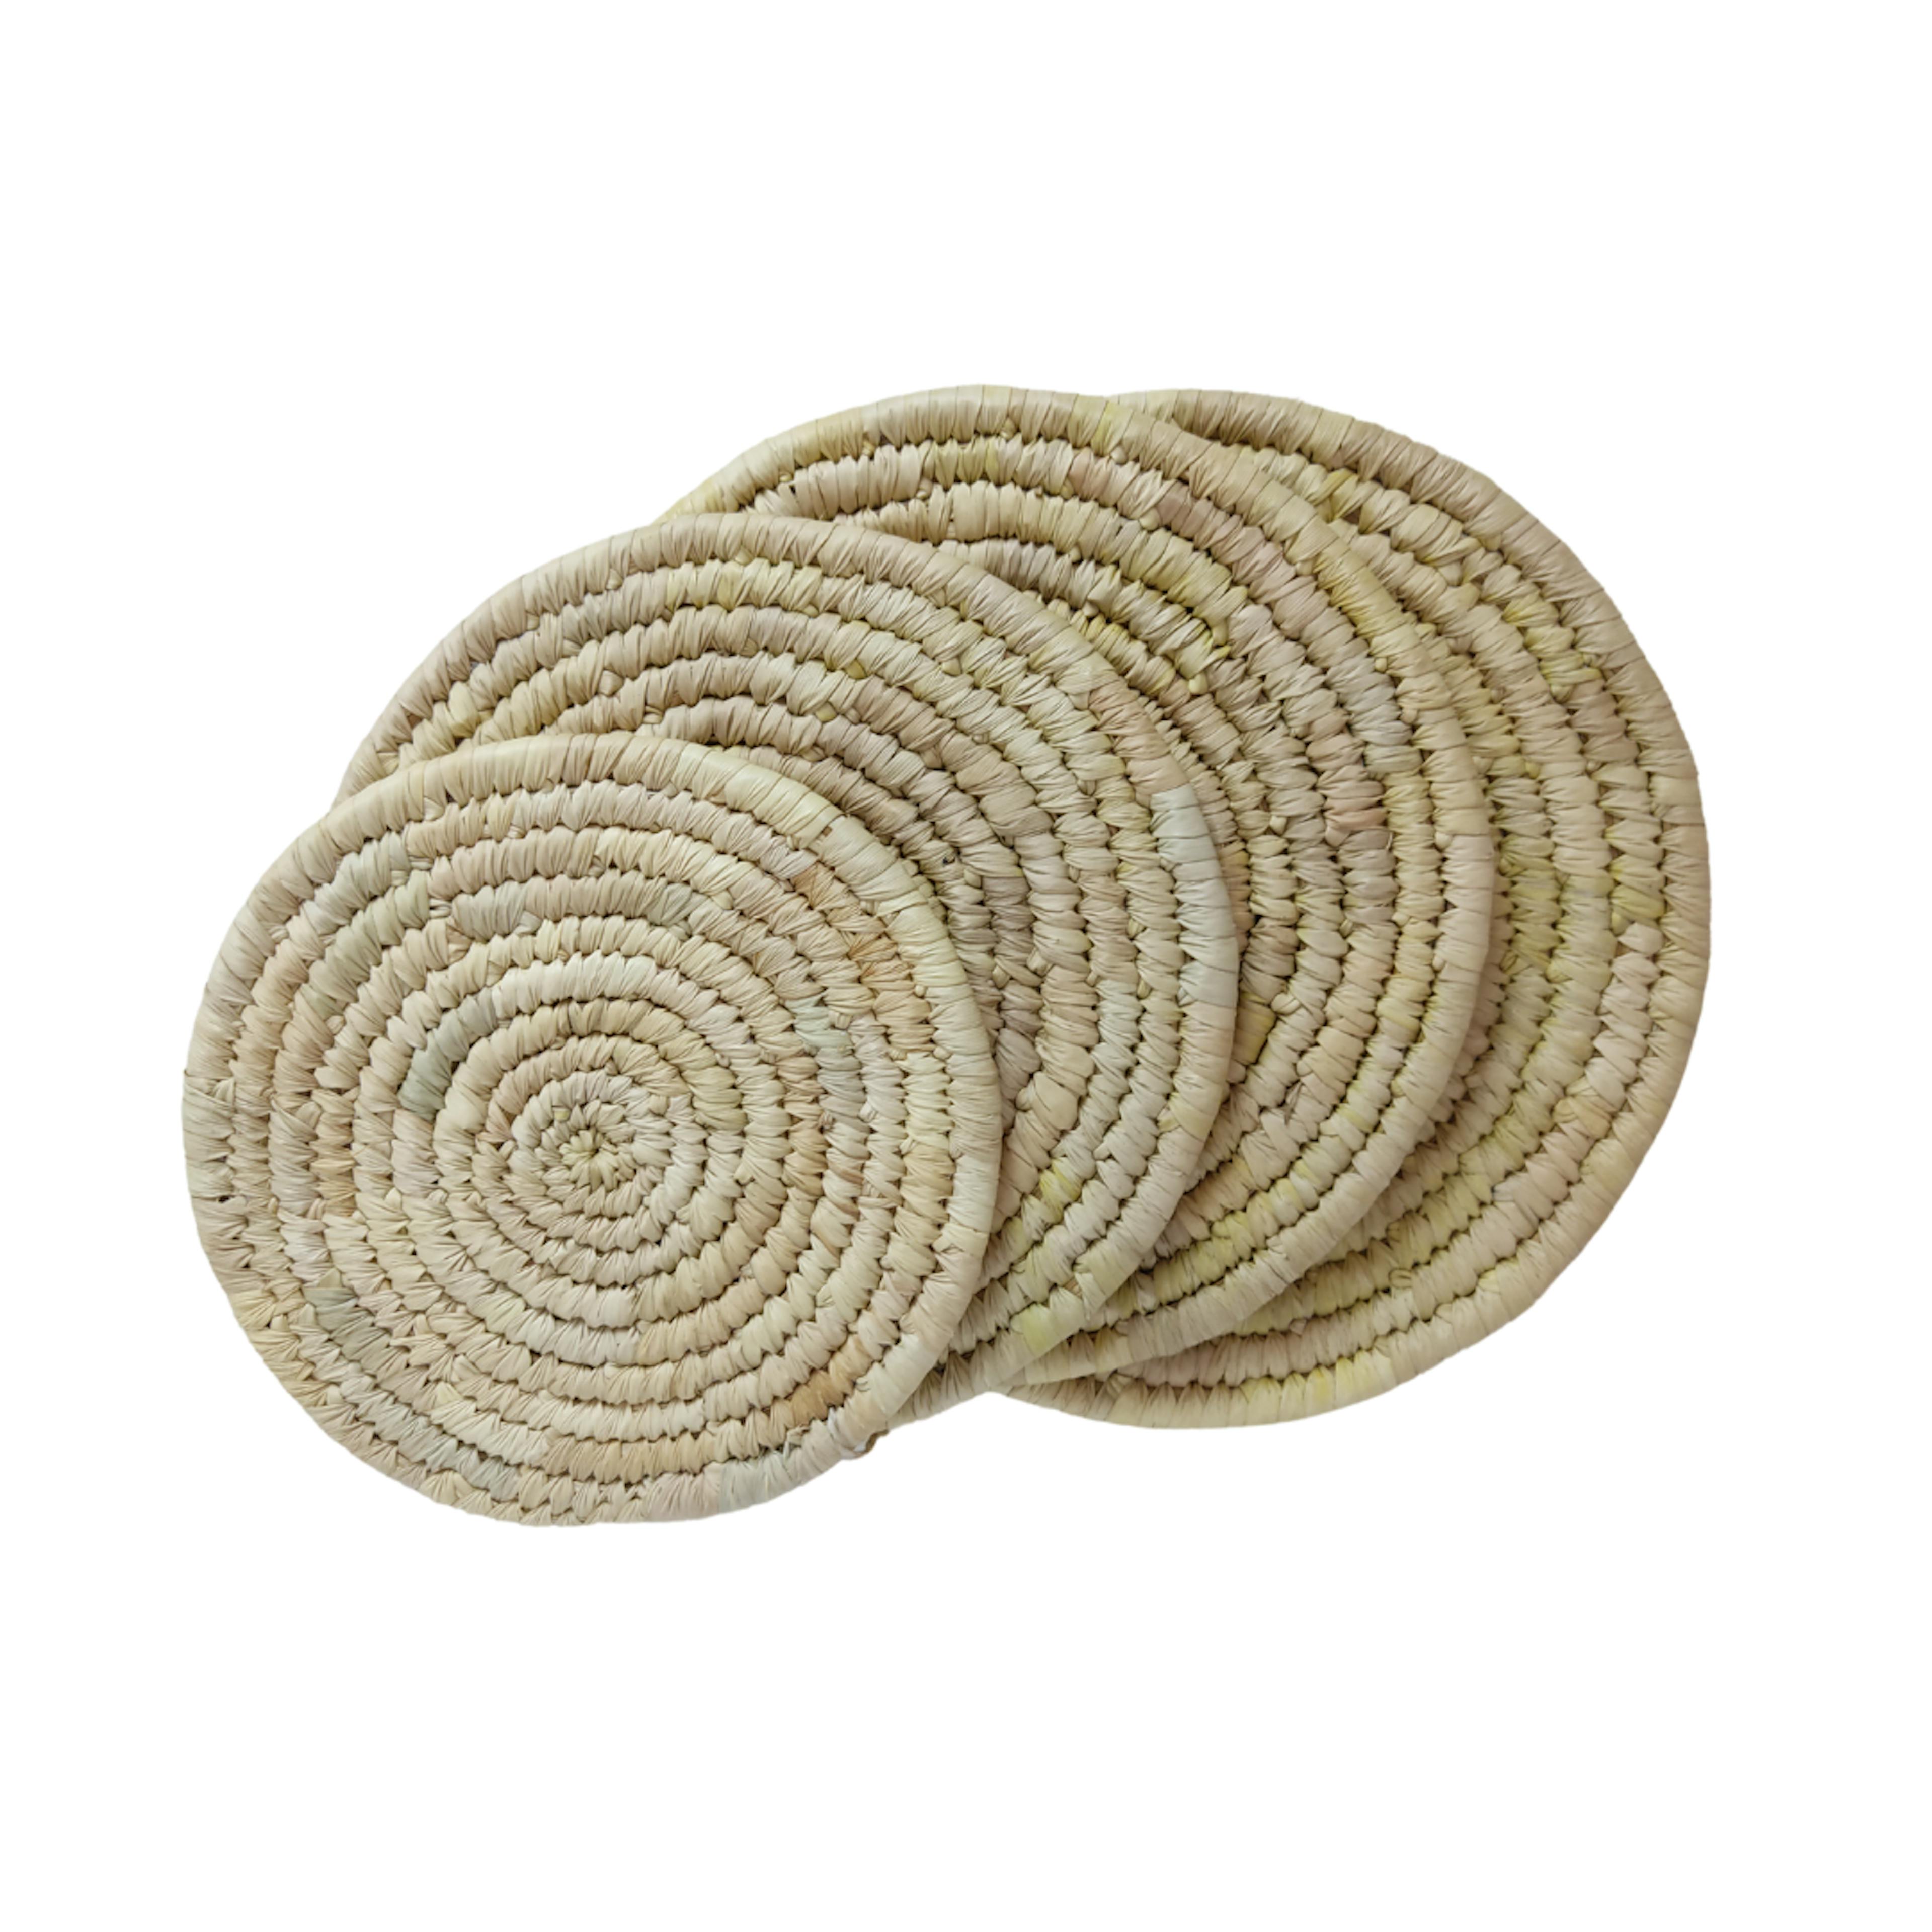 Table Mat | Handwoven Palm Leaf Homeware | Set of 4 | Round